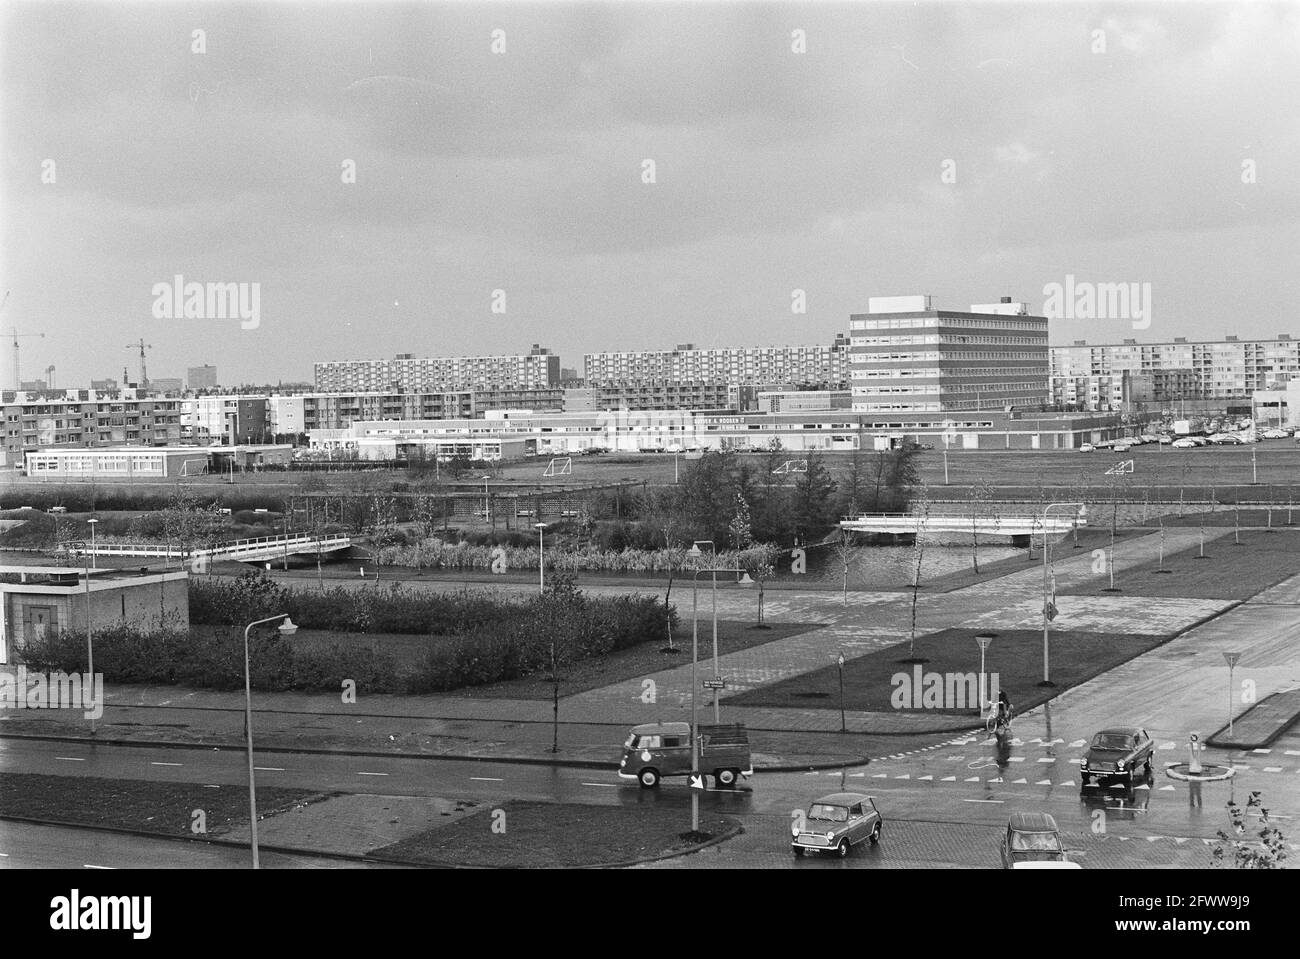 Assignment Elsevier: Winkelcentrum Buitenveldert, November 9, 1970, shopping centers, The Netherlands, 20th century press agency photo, news to remember, documentary, historic photography 1945-1990, visual stories, human history of the Twentieth Century, capturing moments in time Stock Photo